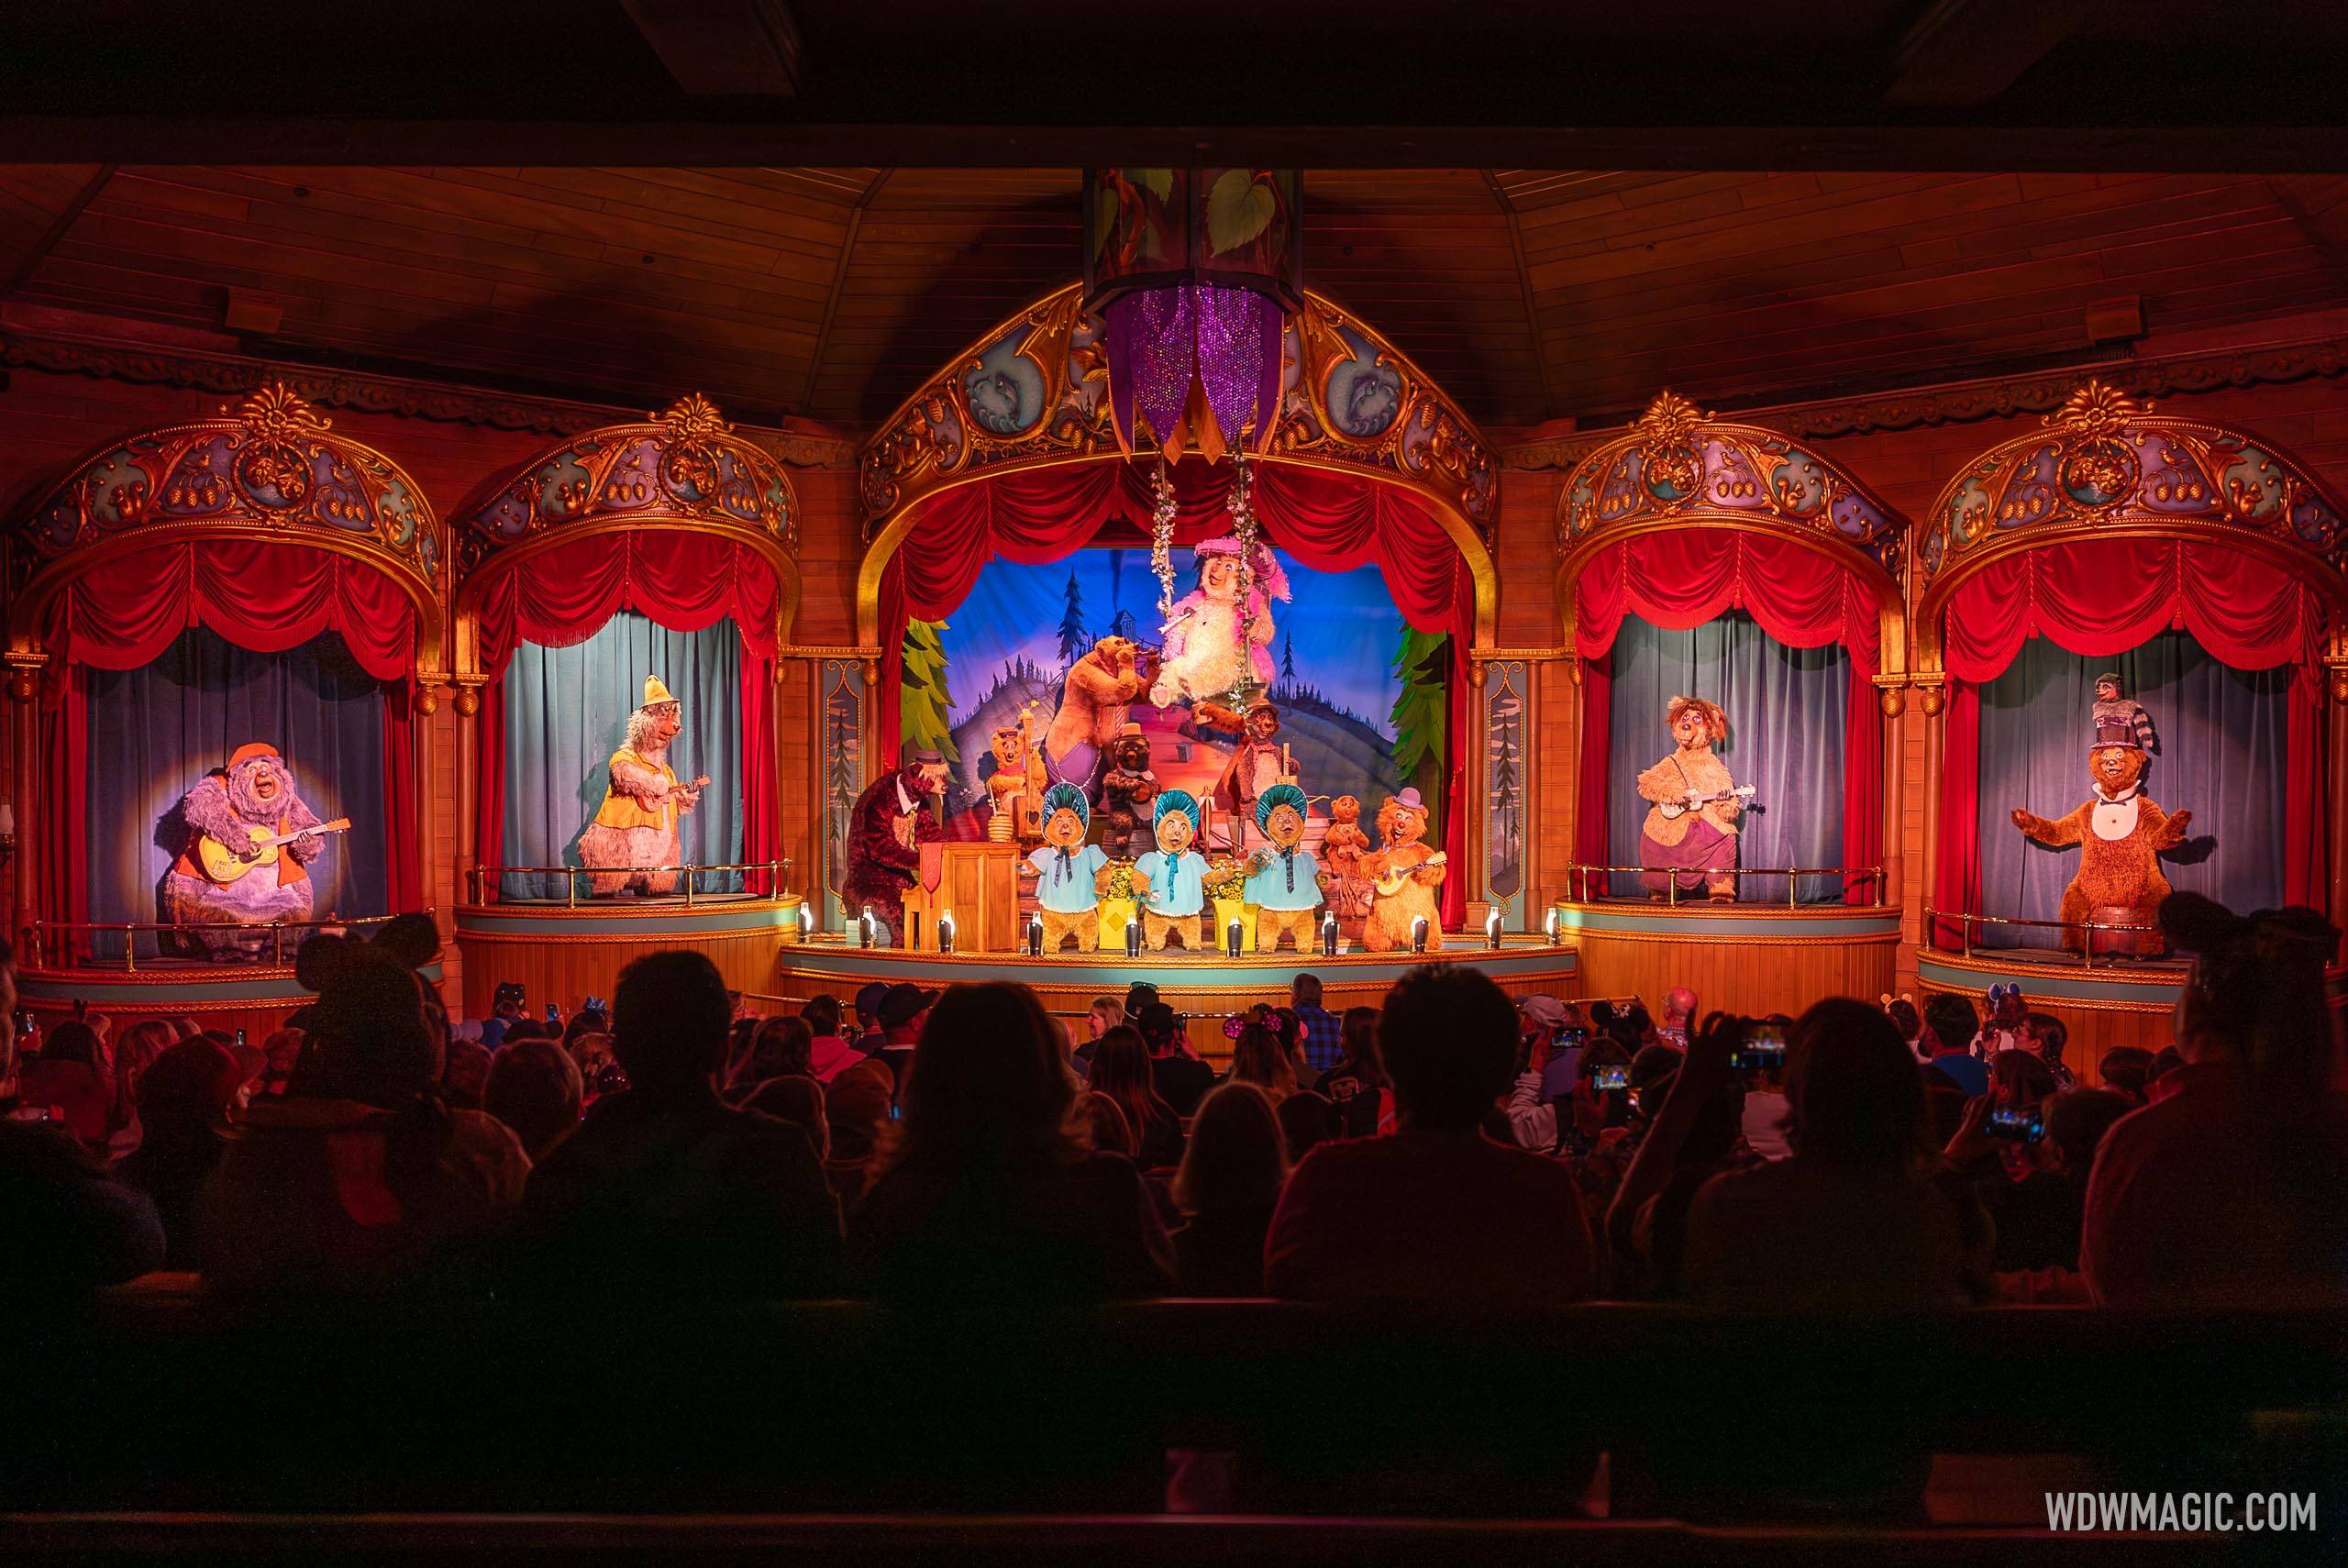 Disney confirms Country Bear Jamboree to continue on and reach its 50th anniversary in 2021